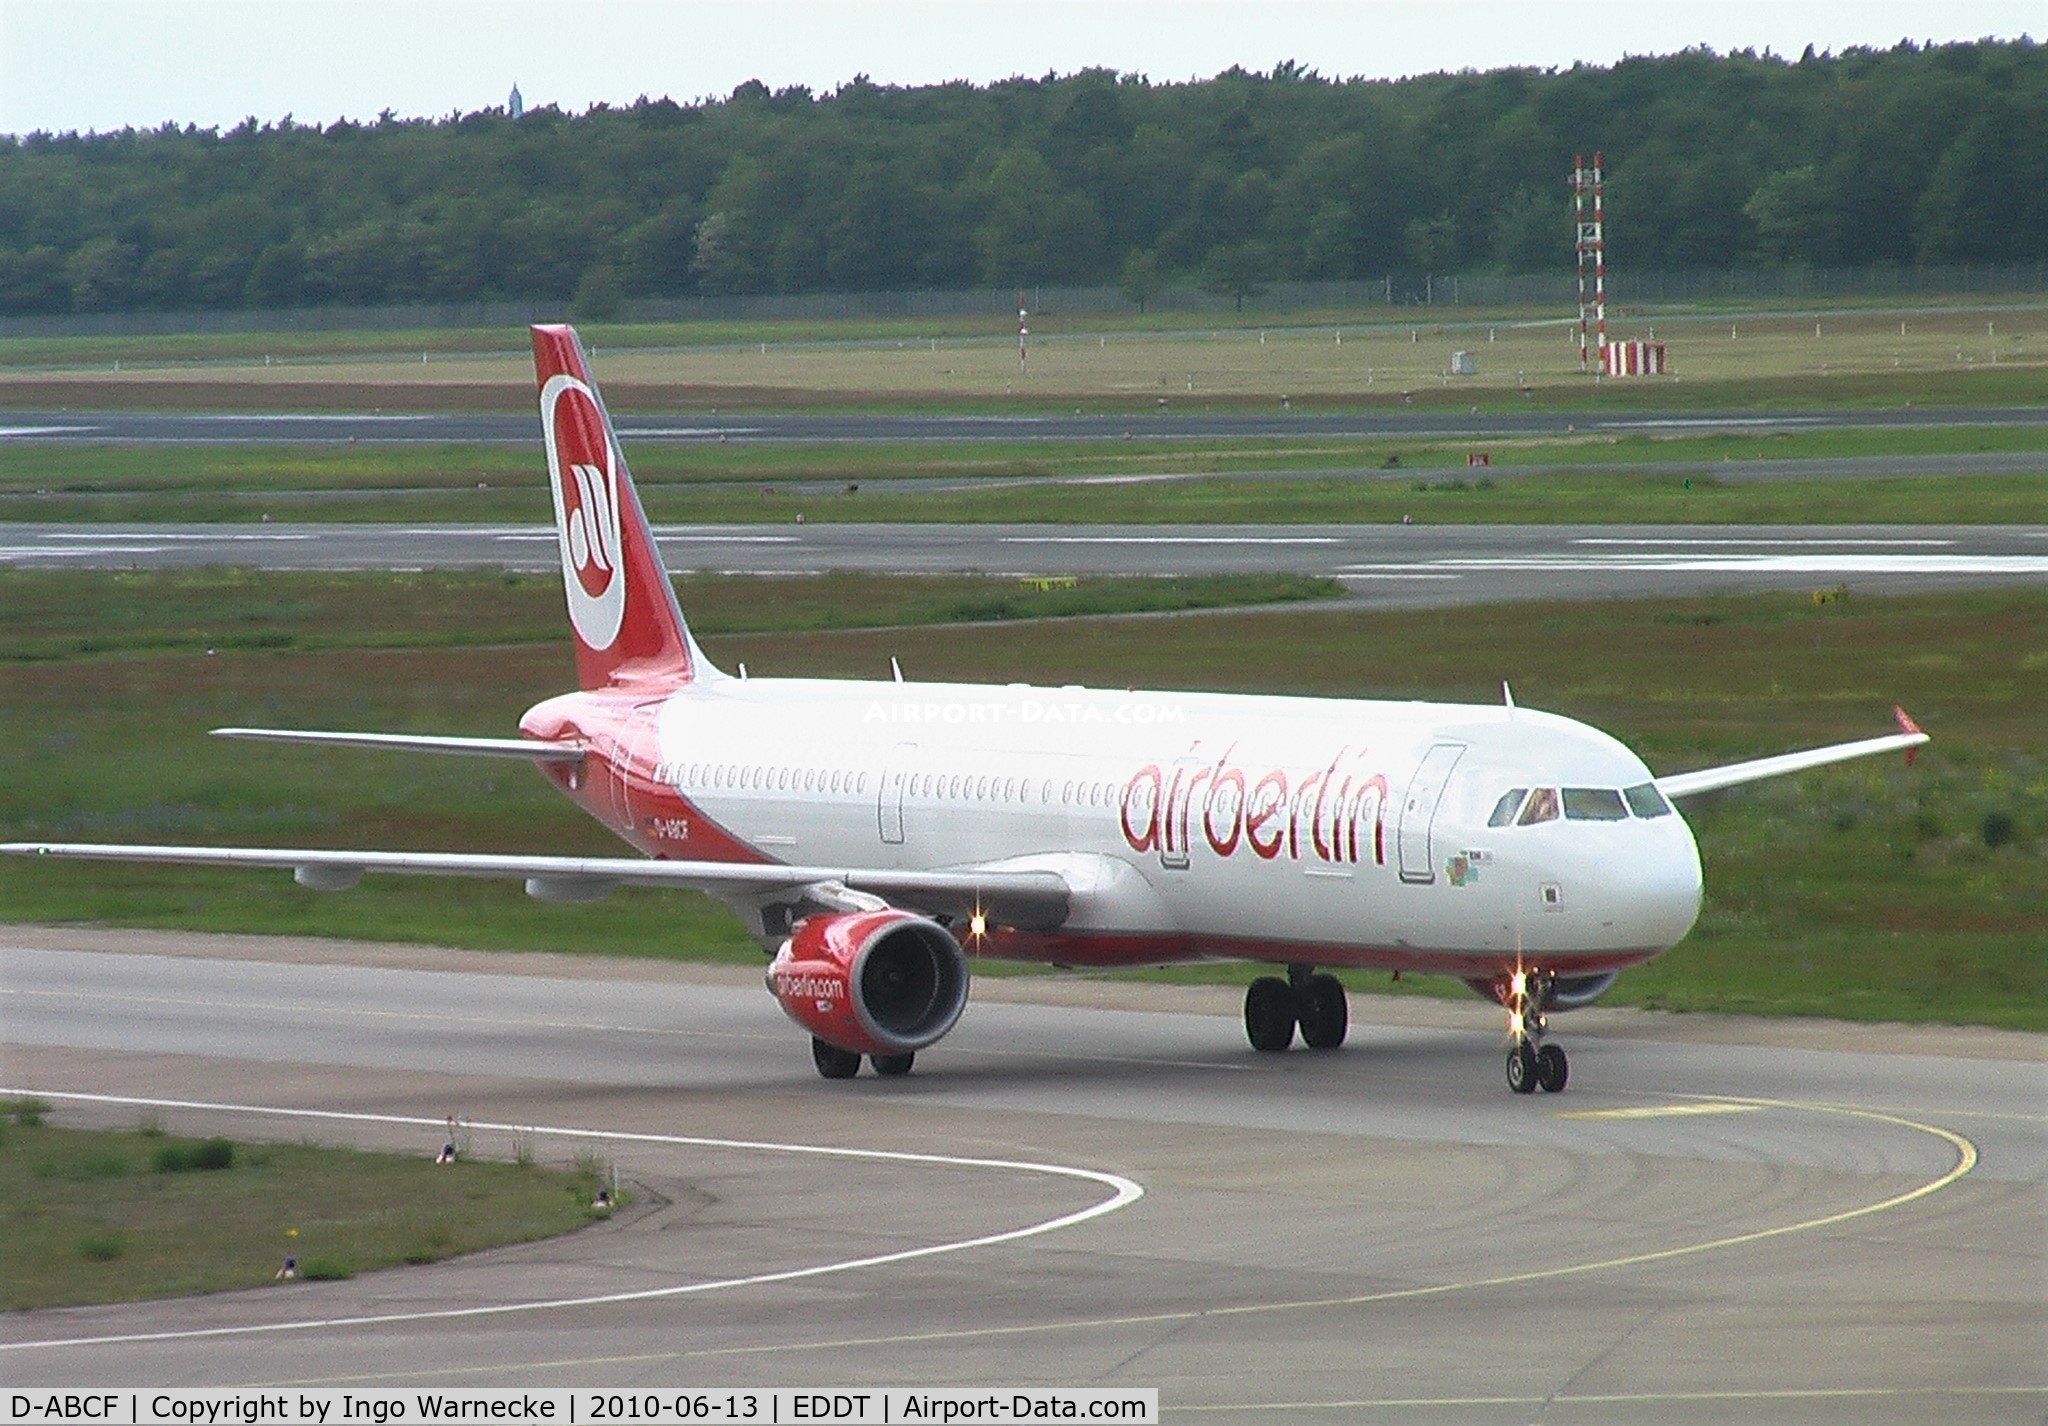 D-ABCF, 2003 Airbus A321-211 C/N 1966, Airbus A321-211 of airberlin at Berlin/Tegel airport